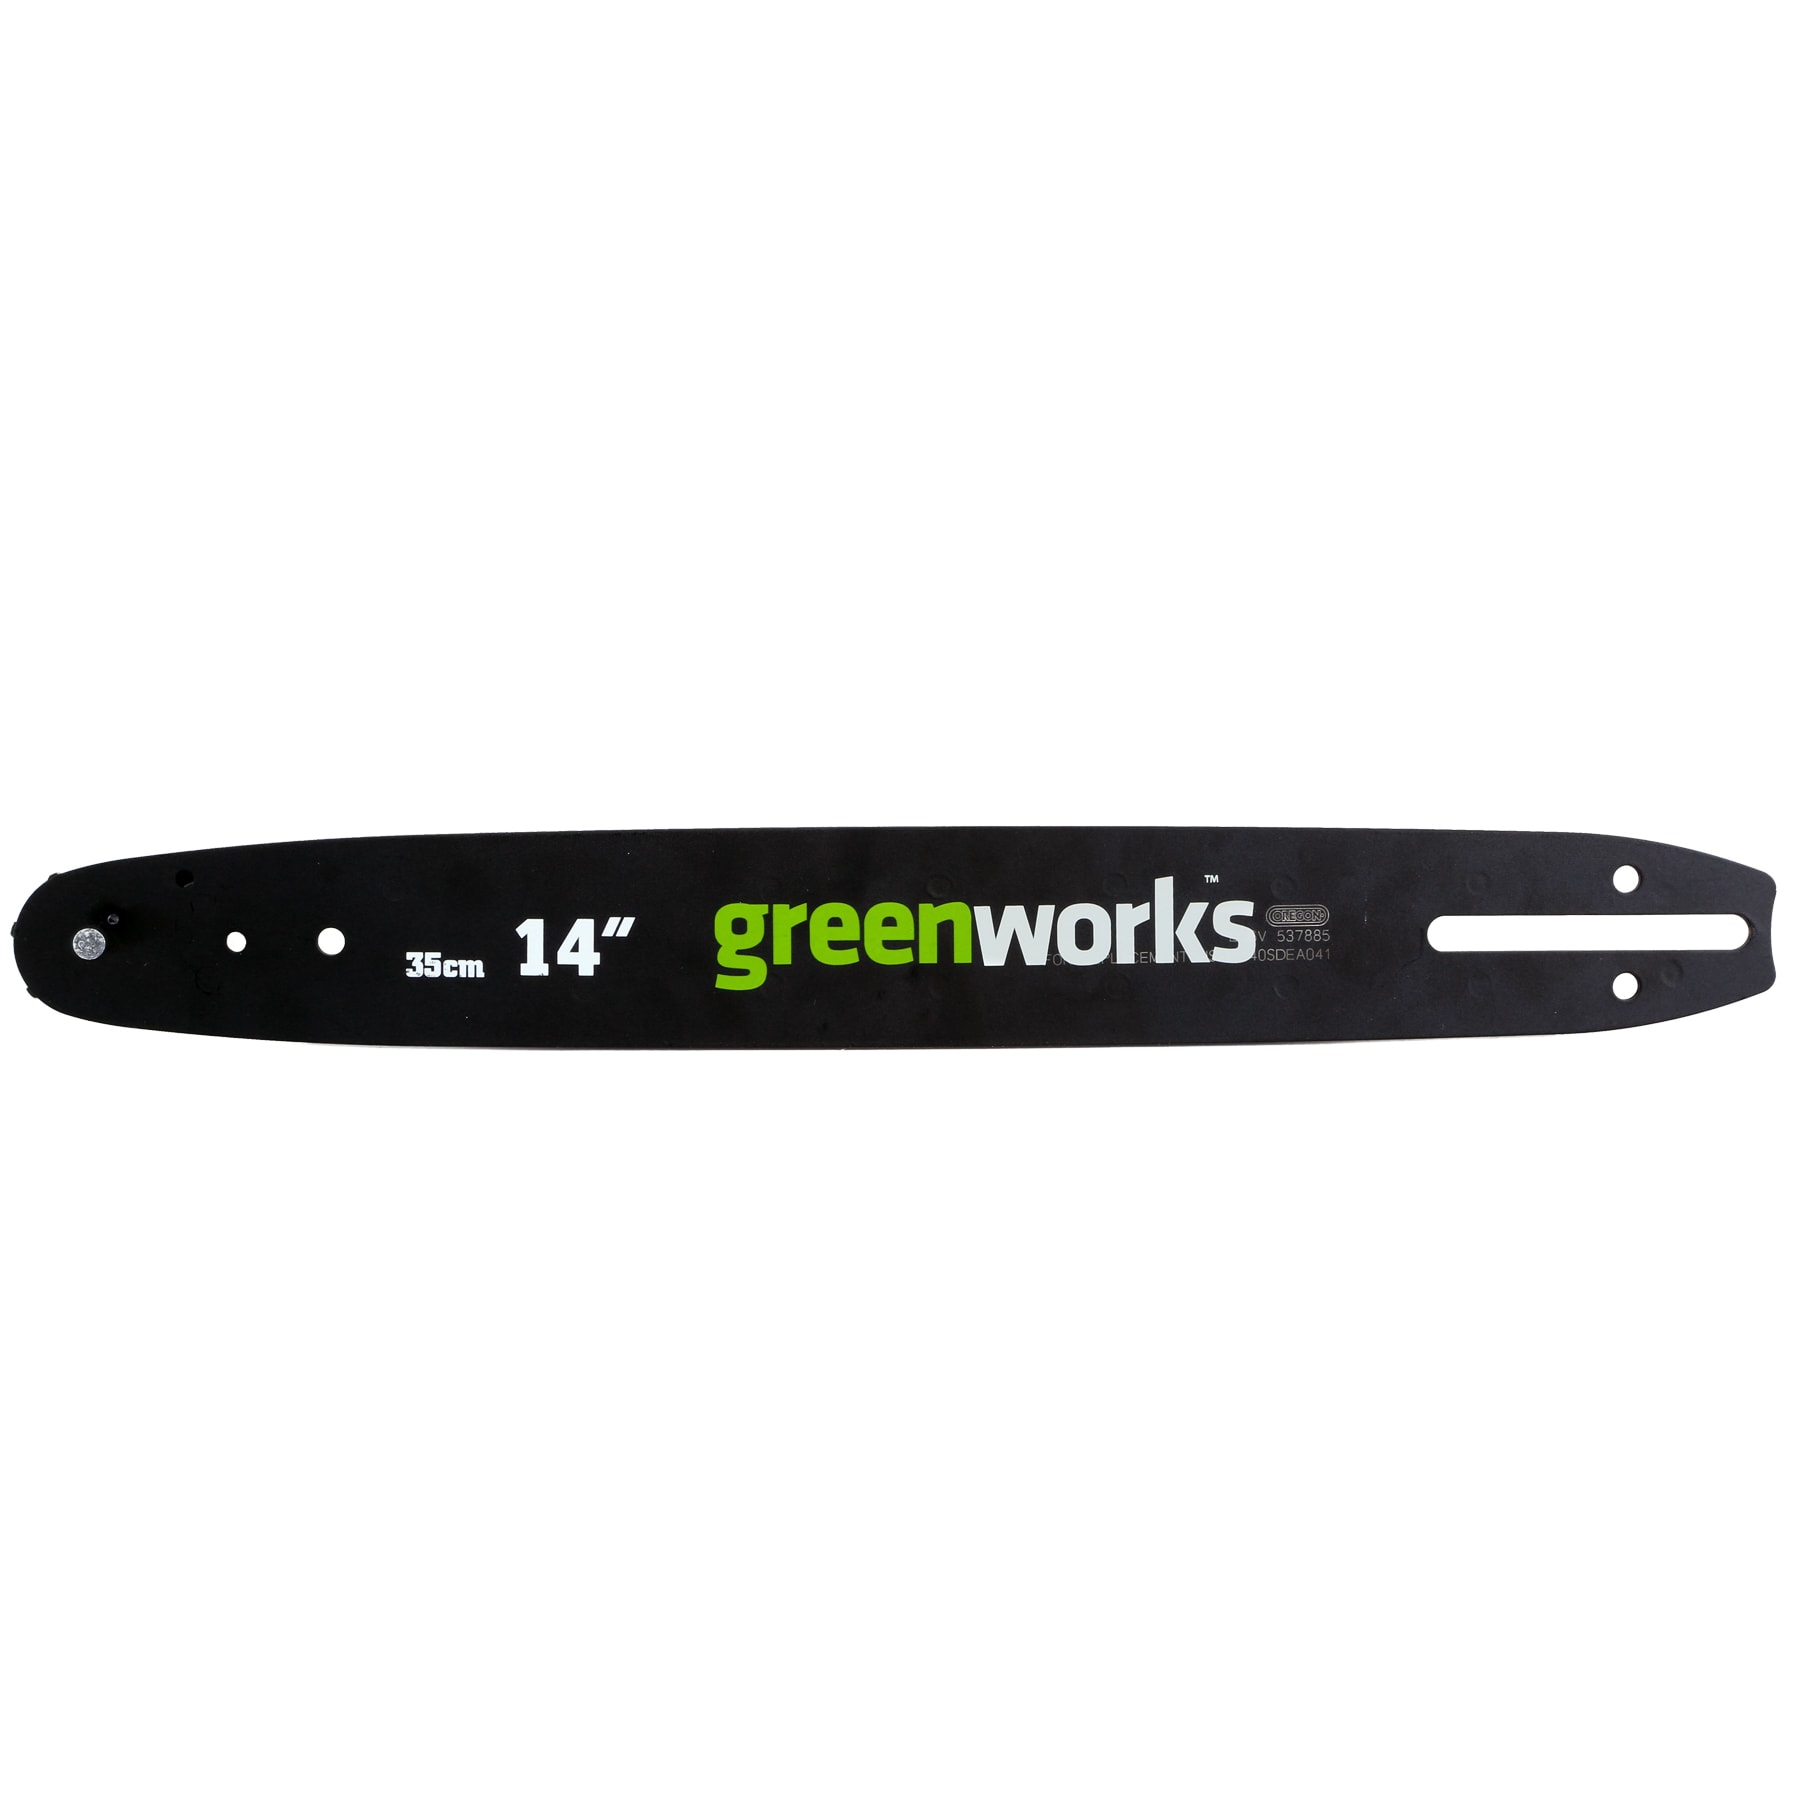 Greenworks - 18-inch Replacement Chainsaw Bar and Chain Combo - Black